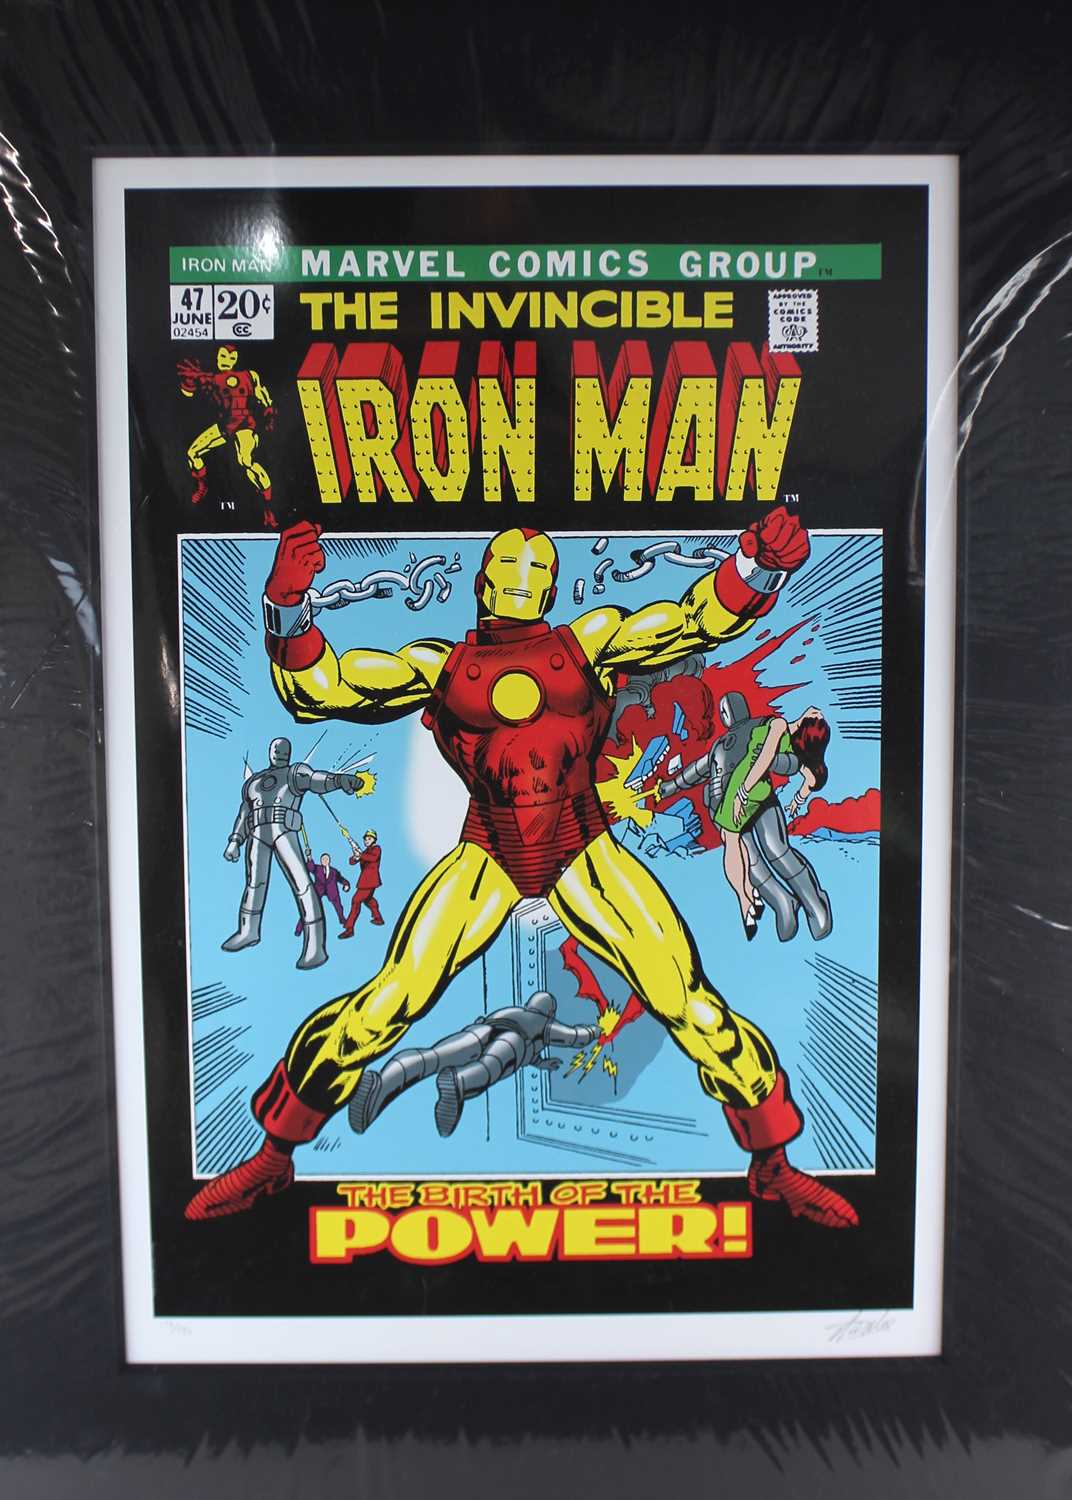 Marvel Superheroes 'The Invincible Iron Man #47' 2013 hand signed by Stan Lee in pencil and numbered